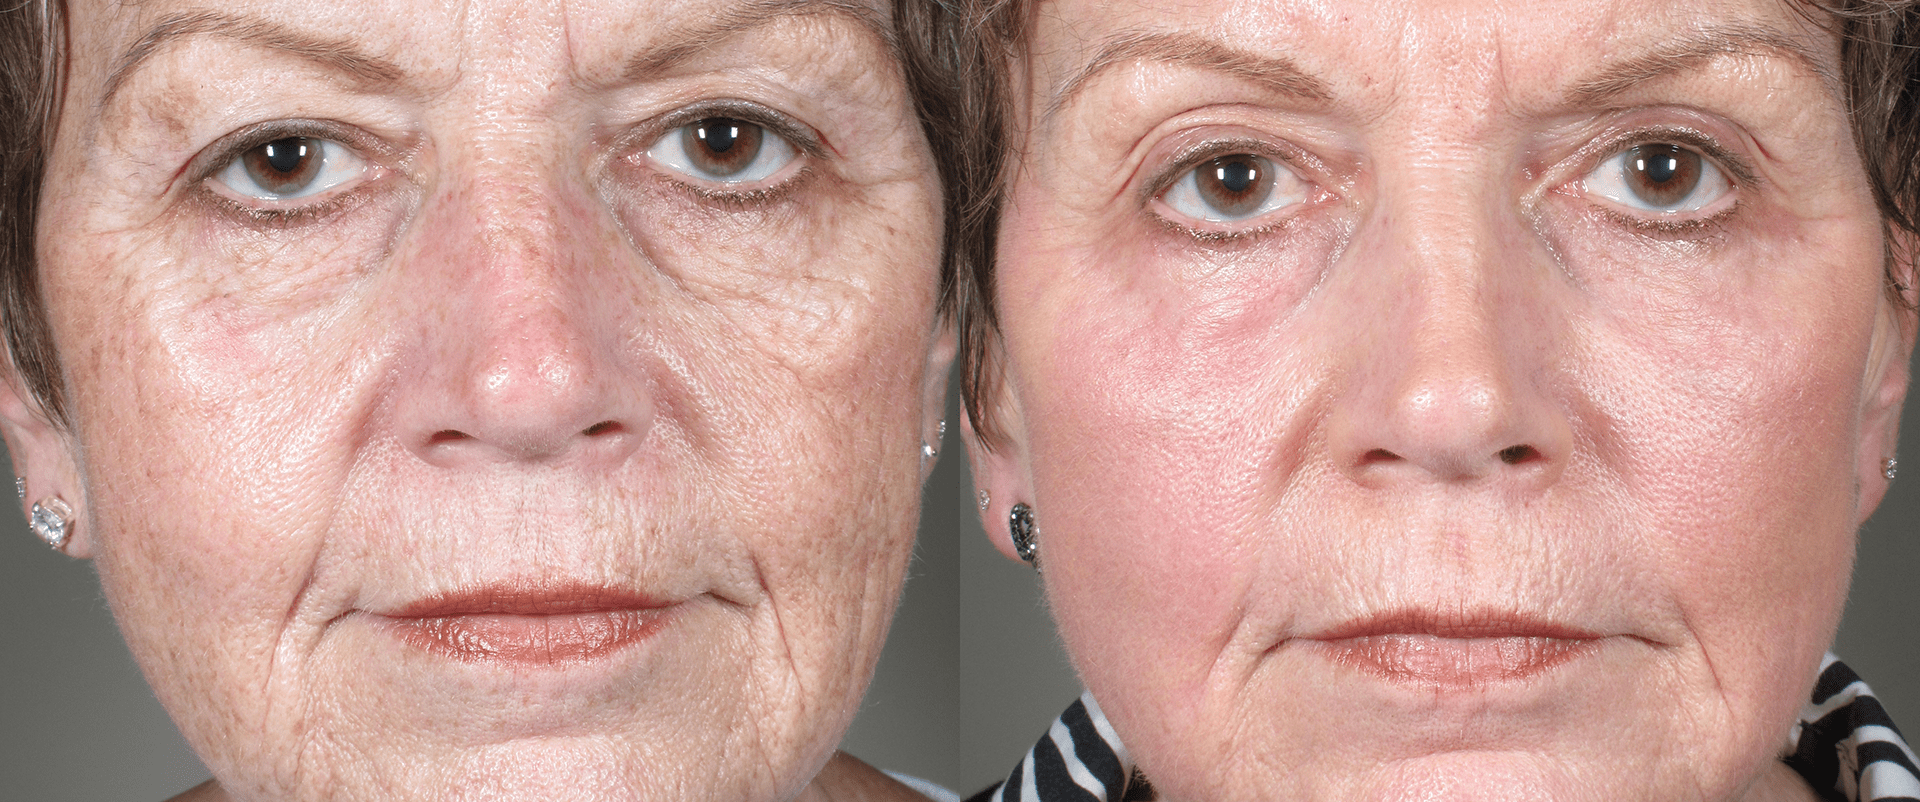 Top Reasons Why Fractional CO2 Laser Skin Resurfacing Works Well